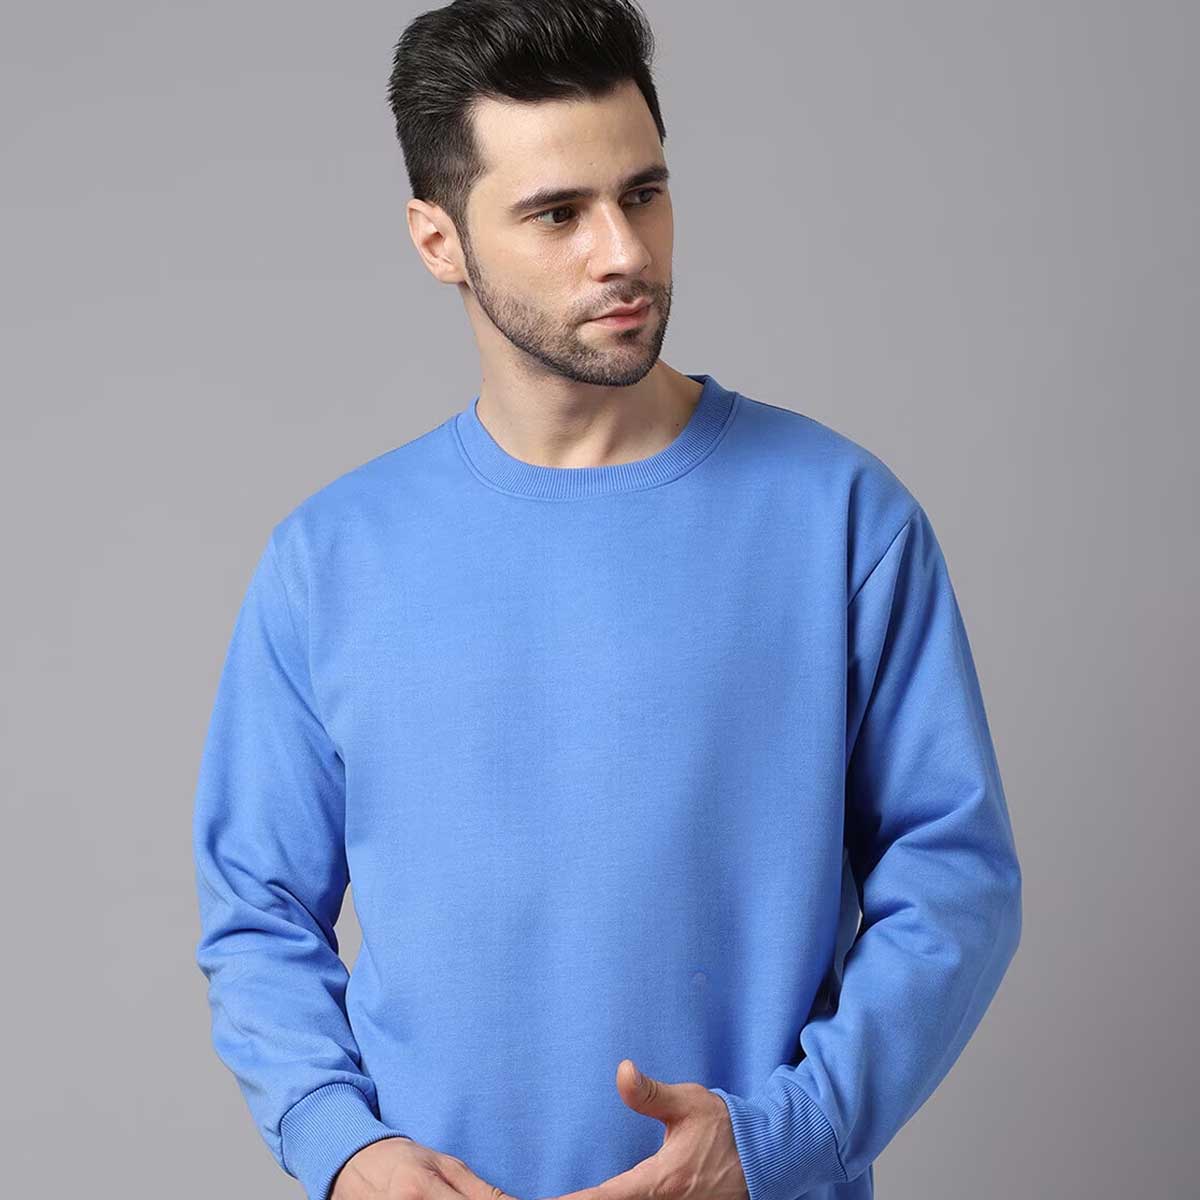 Promotional Sweatshirts Manufacturers in Spain